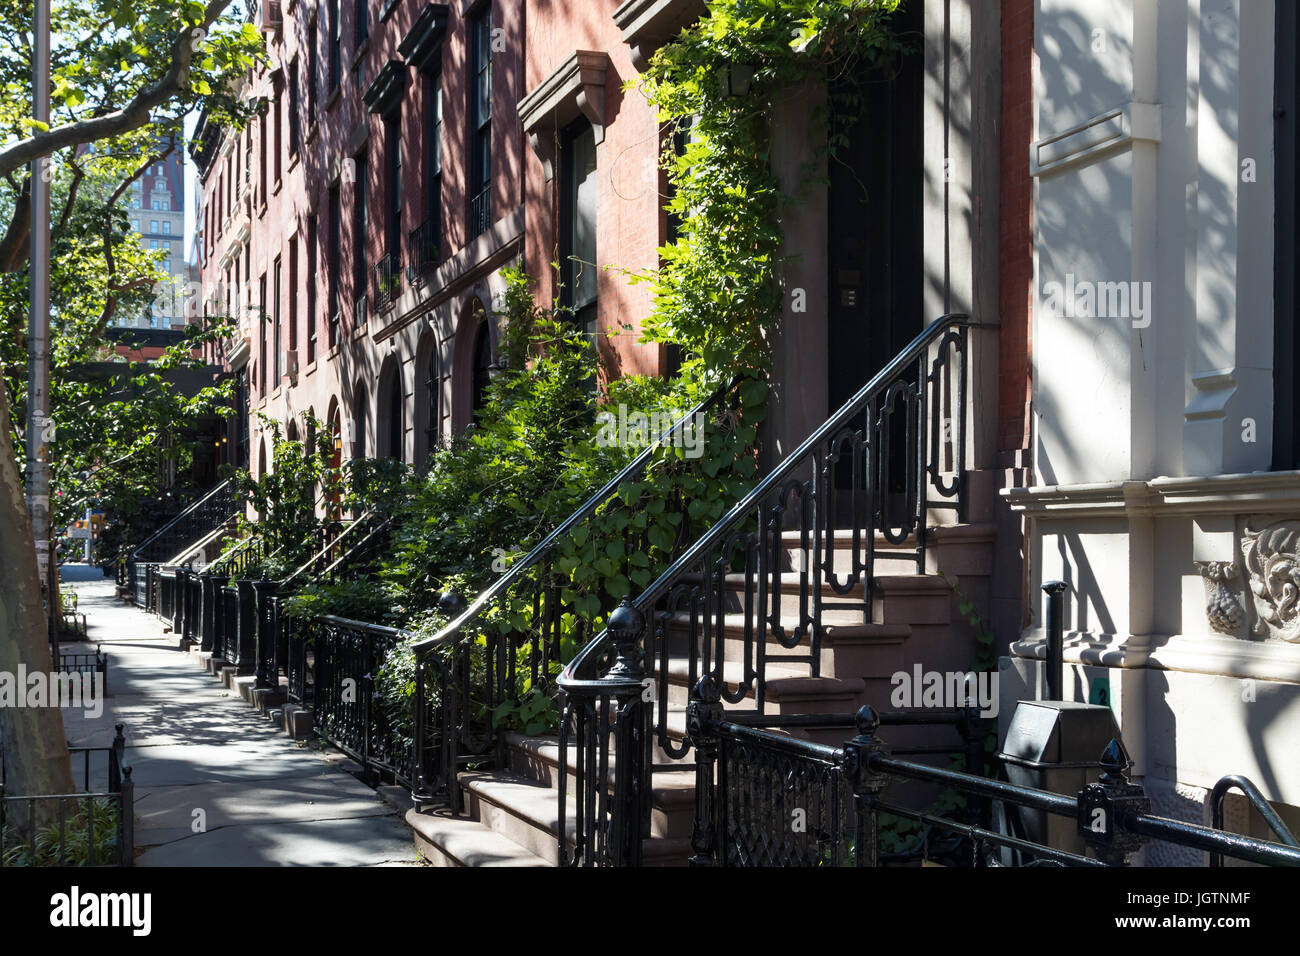 Empty sidewalk in front of historic brownstone buildings in the Gramercy Park neighborhood of Manhattan in New York City NYC Stock Photo